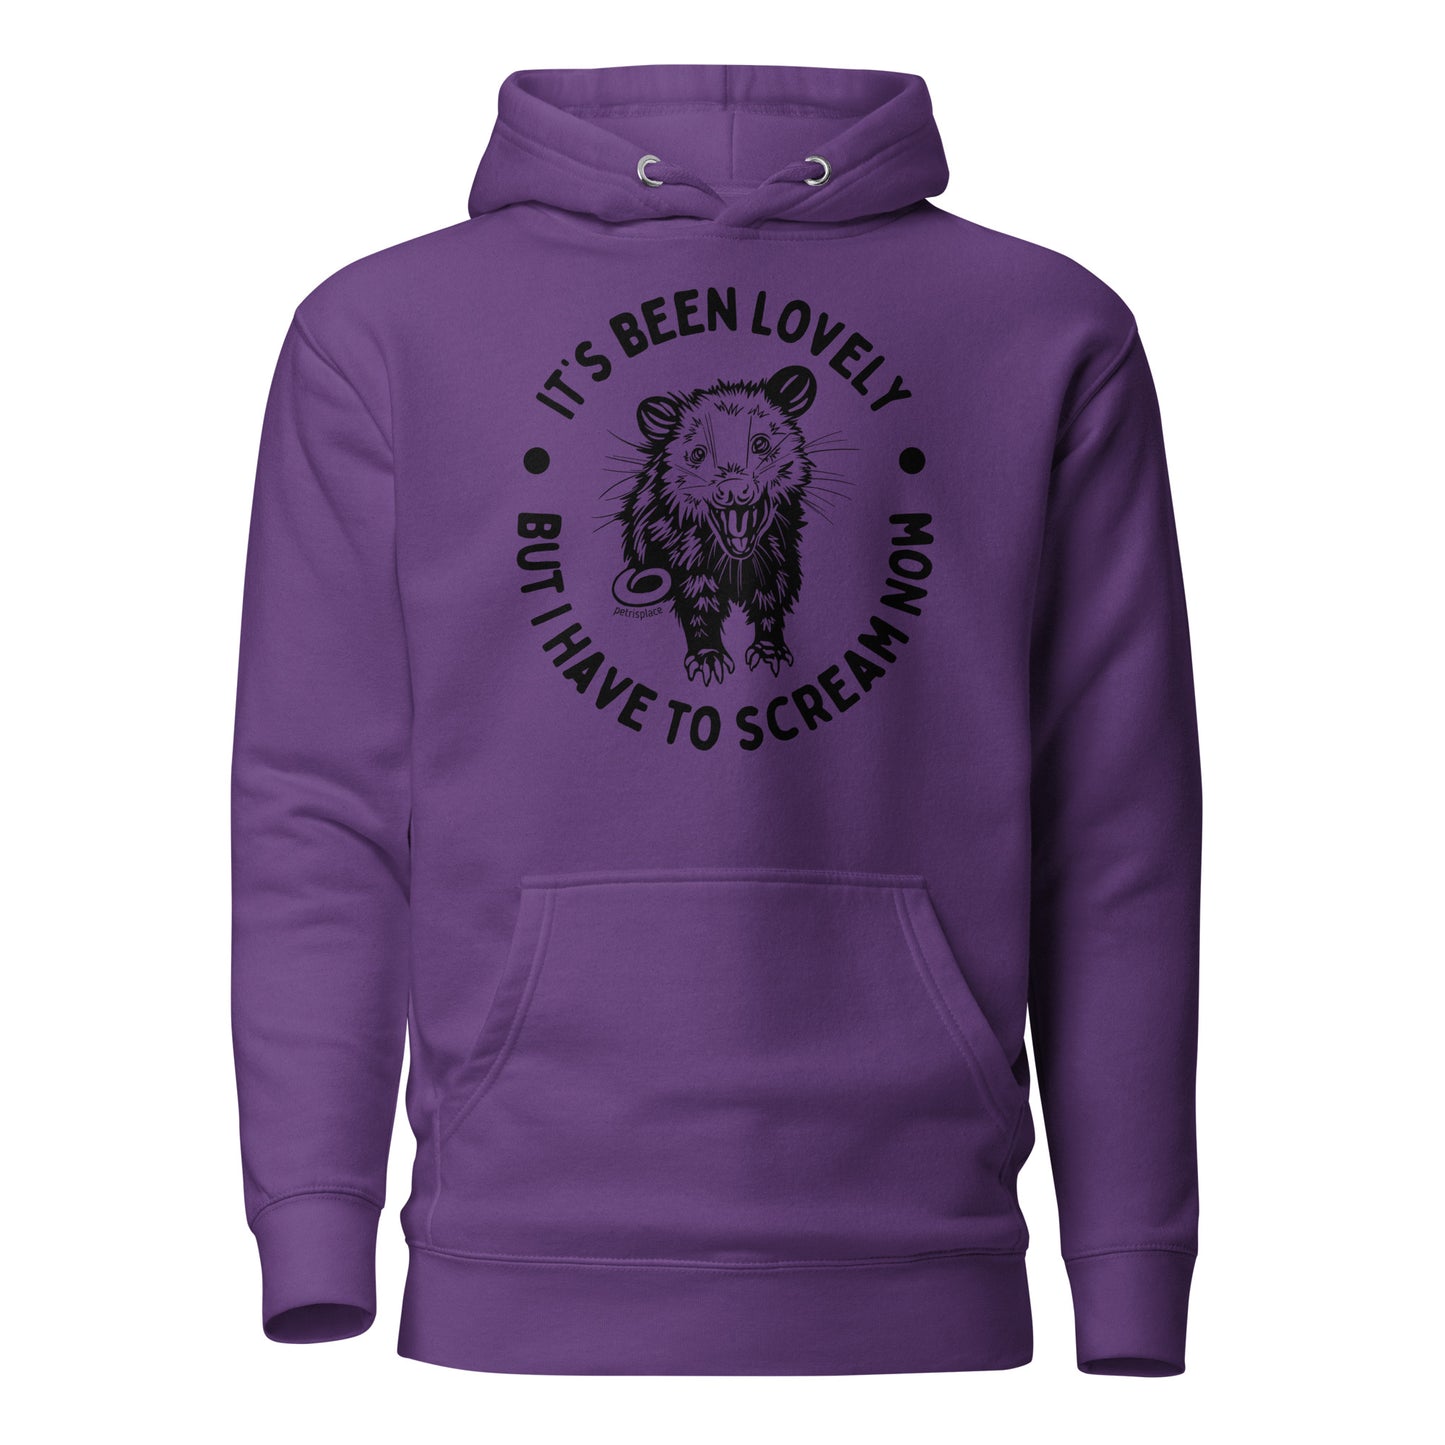 It's Been Lovely, But I Have To Scream Now Unisex Hoodie